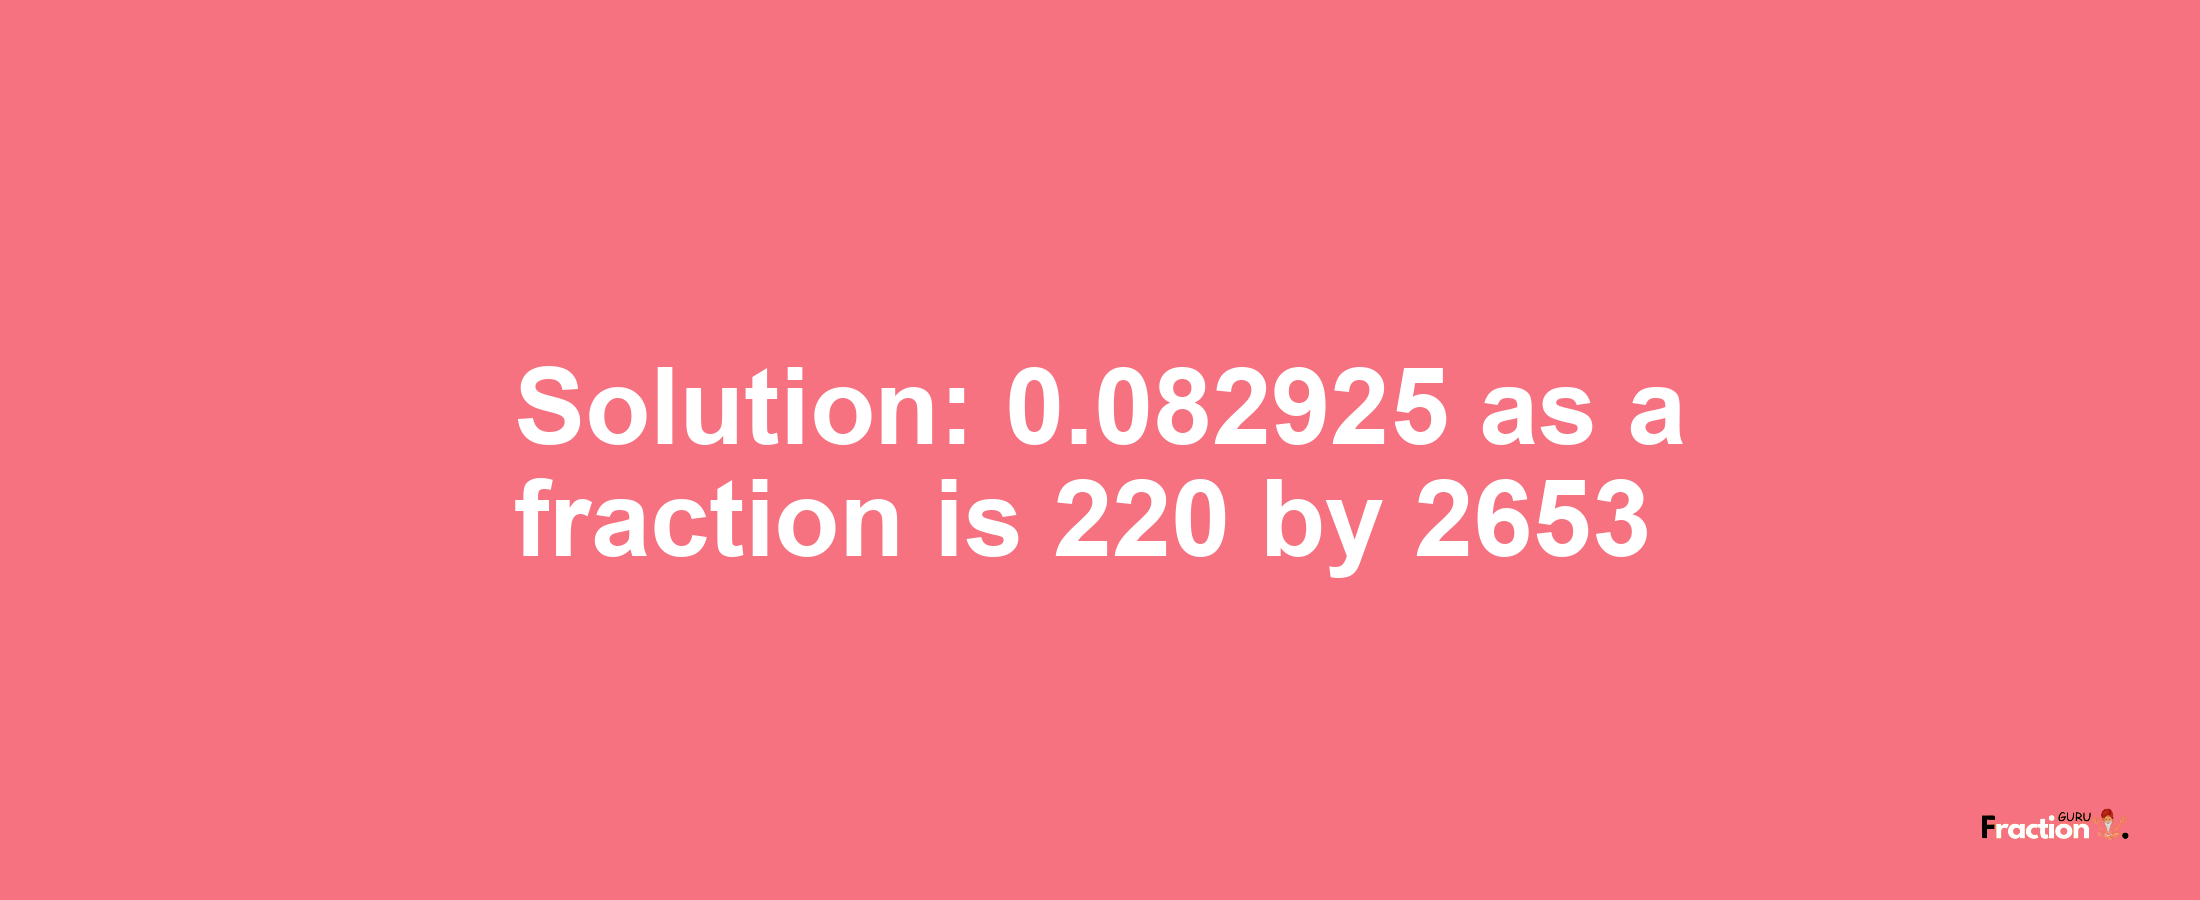 Solution:0.082925 as a fraction is 220/2653